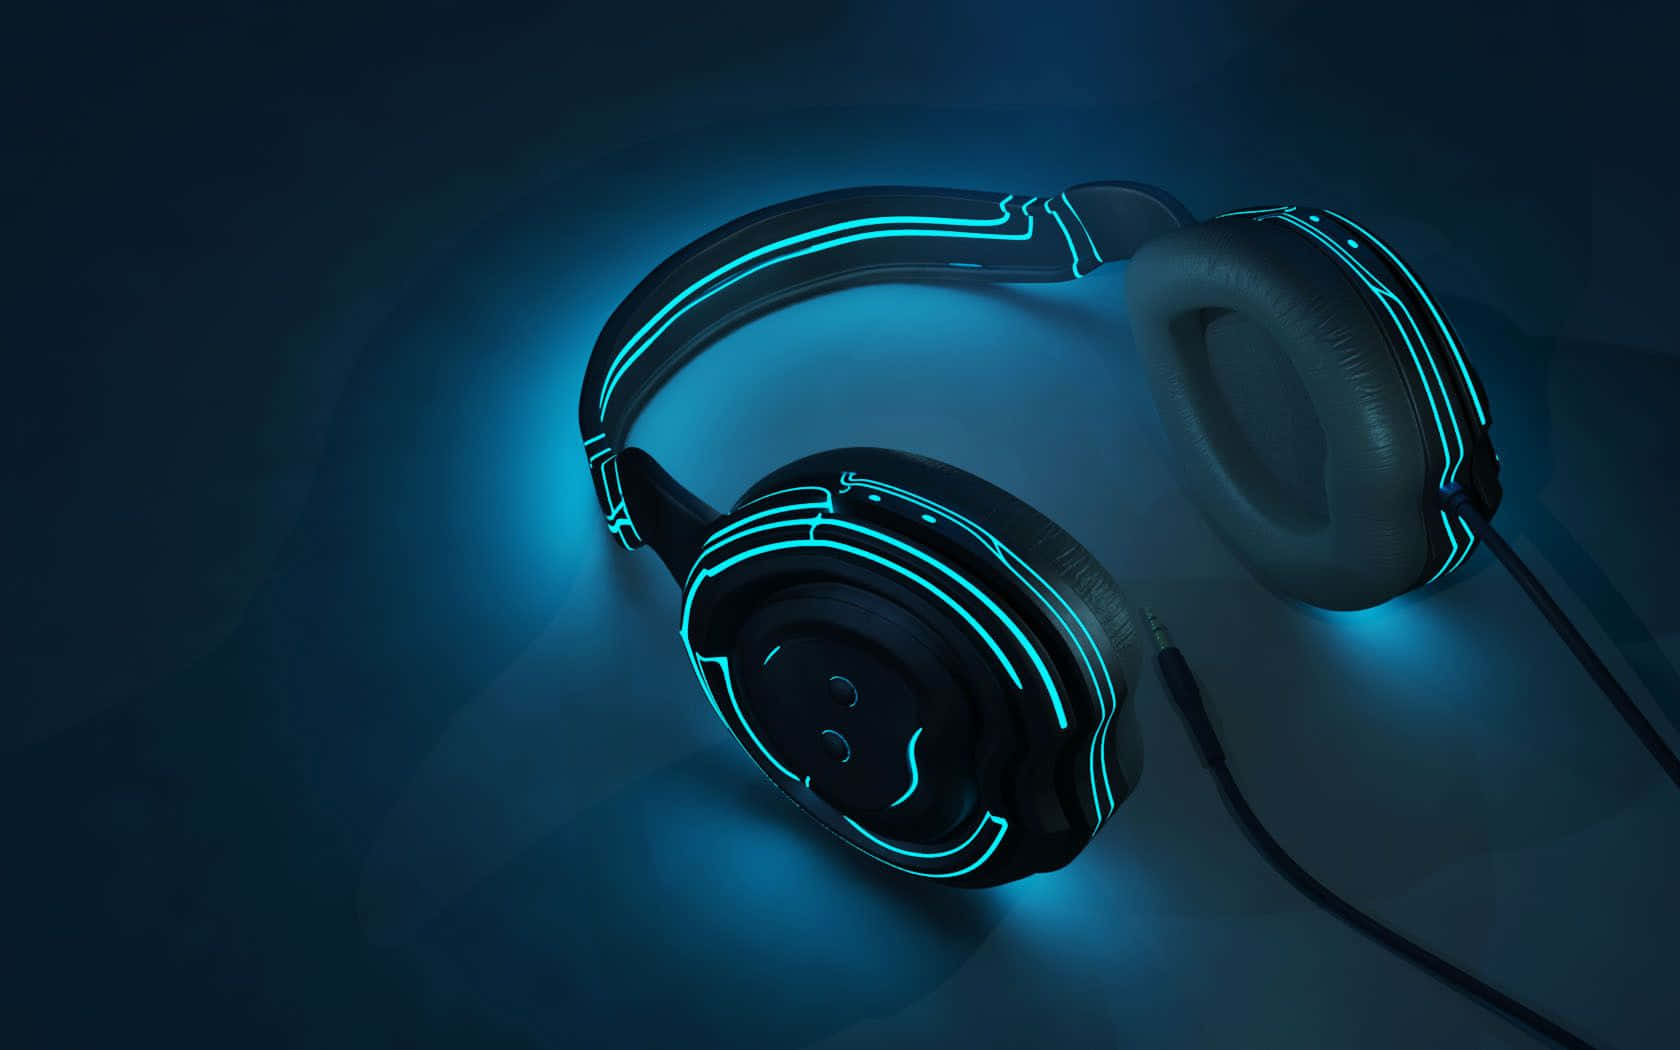 A Pair Of Headphones With Blue Lights On Them